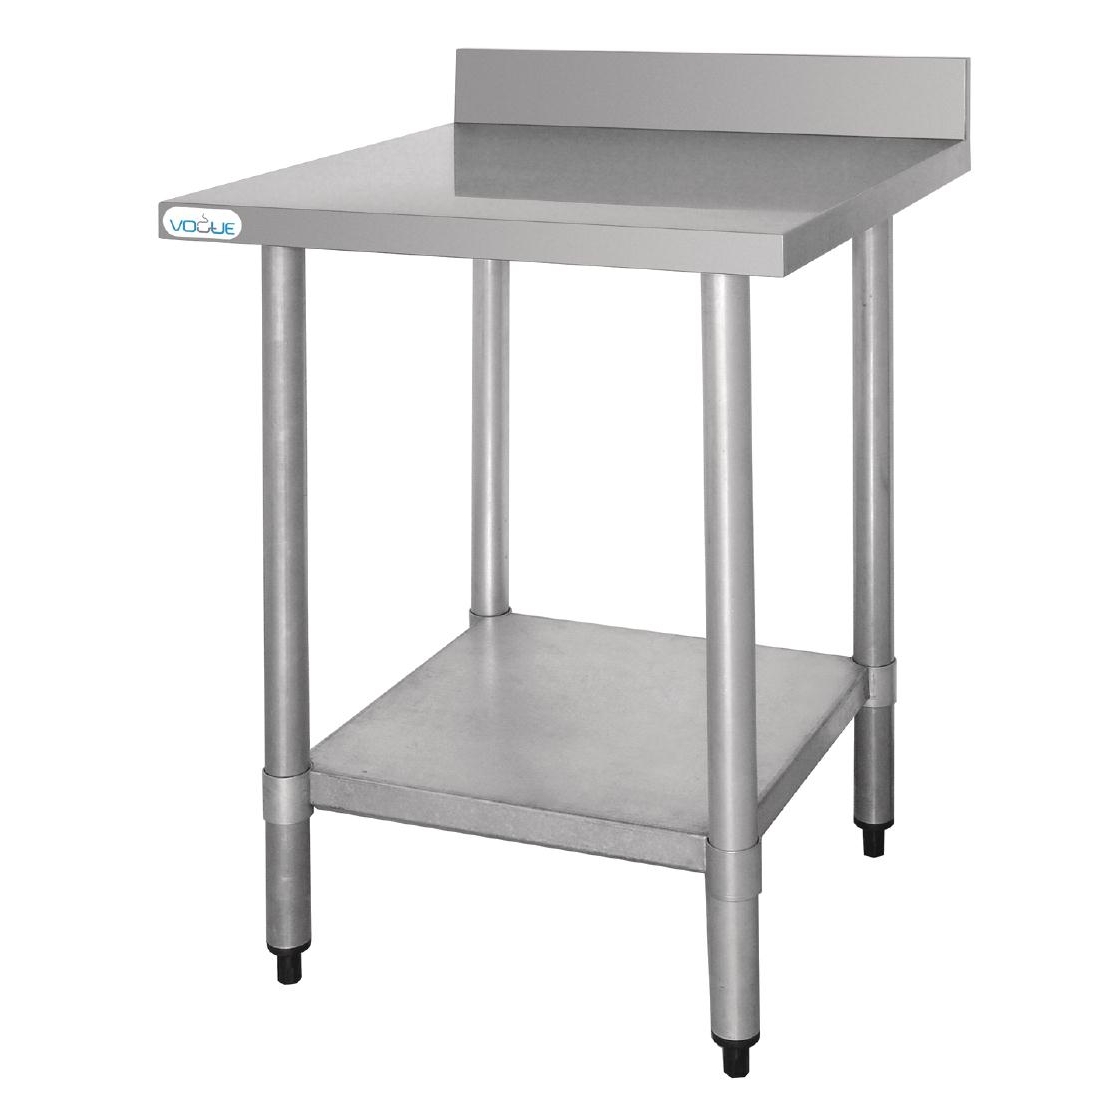 Vogue Table Shelf Made of Stainless Steel 600x900mm 900 x 600 mm D W 